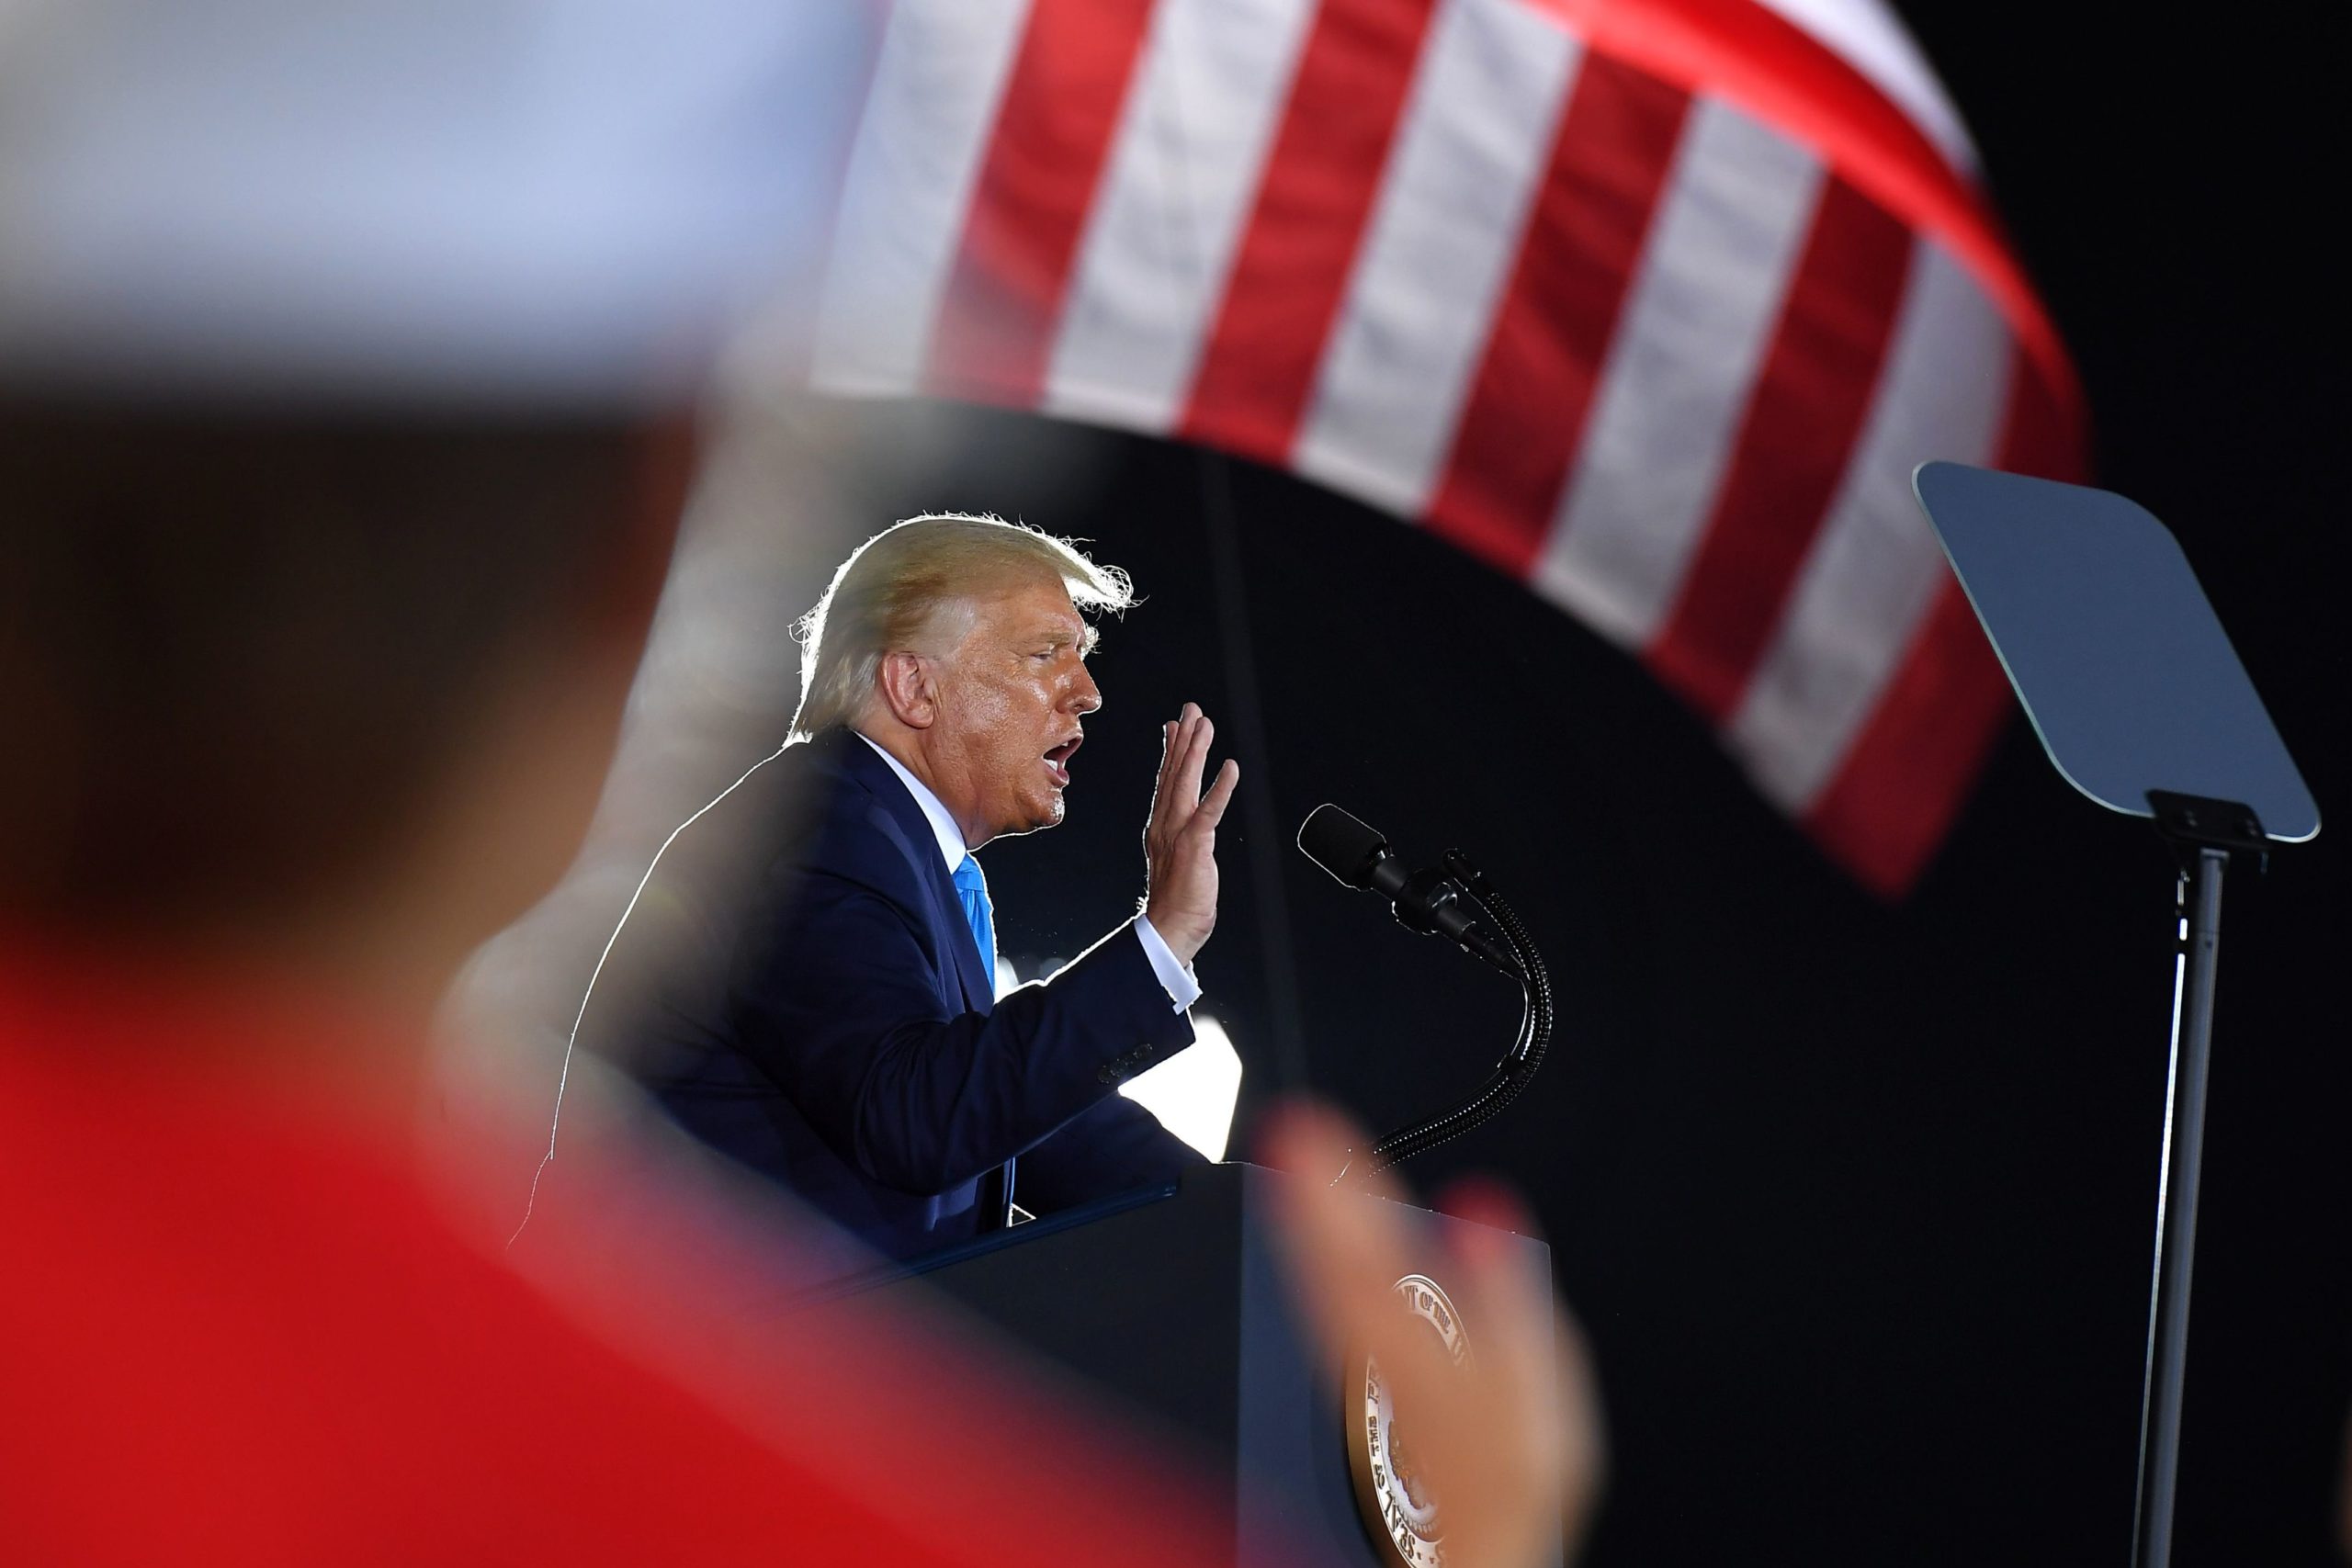 U.S. President Donald Trump addresses supporters during a campaign event at Arnold Palmer Regional Airport in Latrobe, Pennsylvania on September 3, 2020. (Mandel Ngan/AFP via Getty Images)